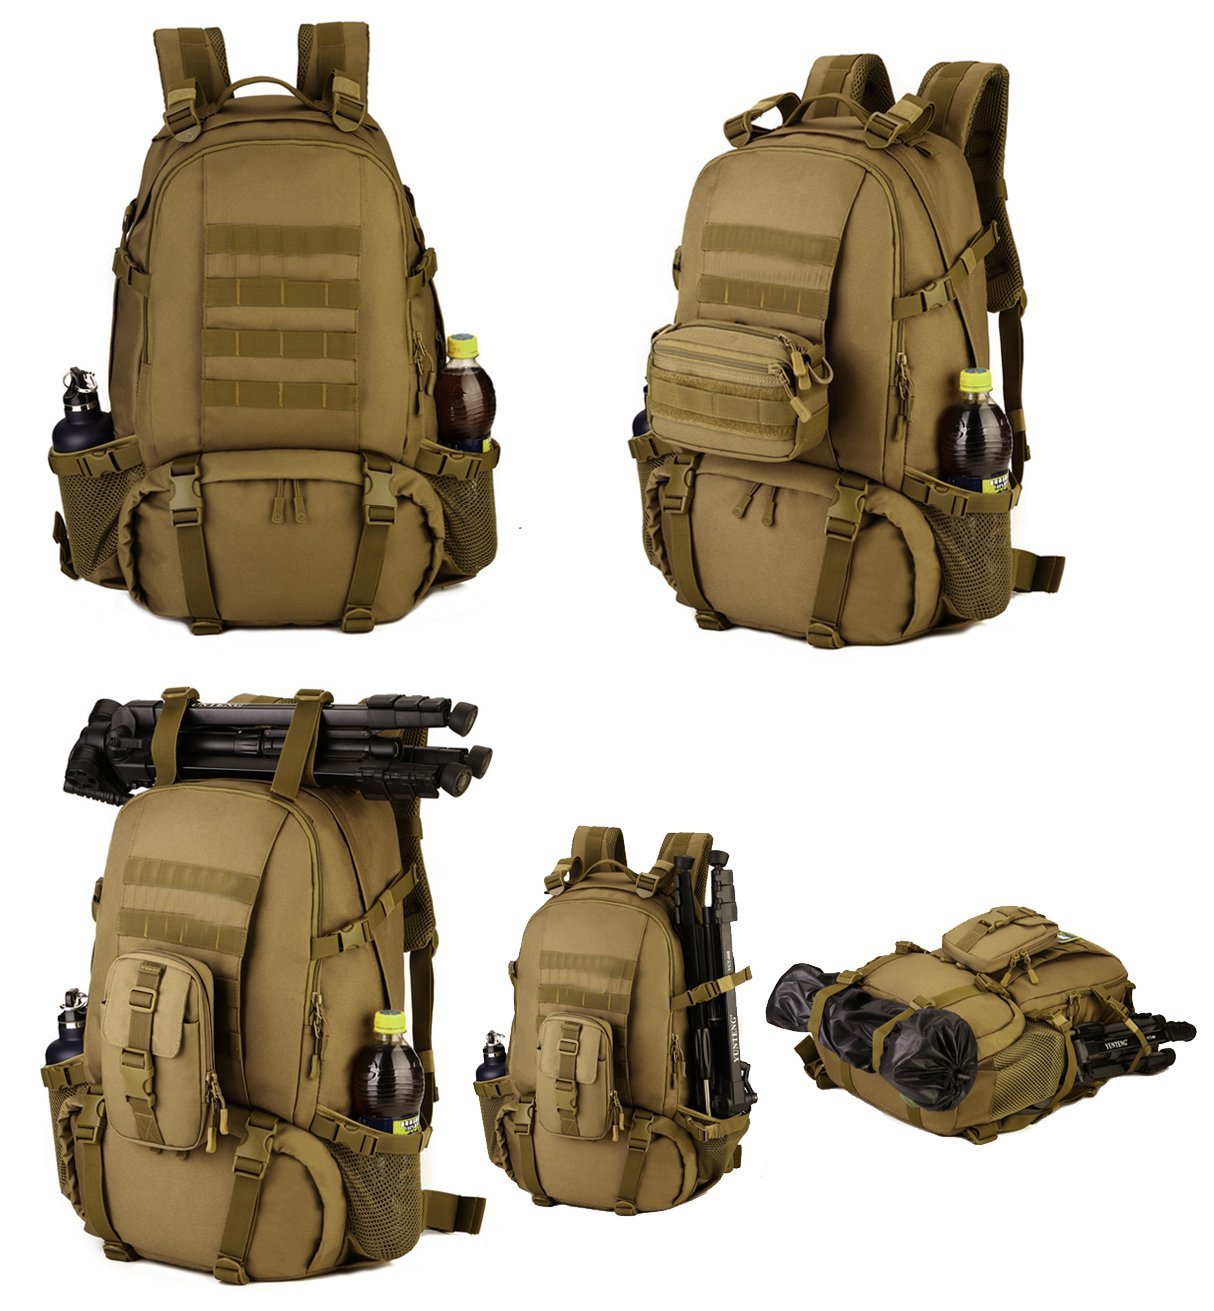 40L Tactical Military Backpack Rucksack Gear Assault Pack Camping ...